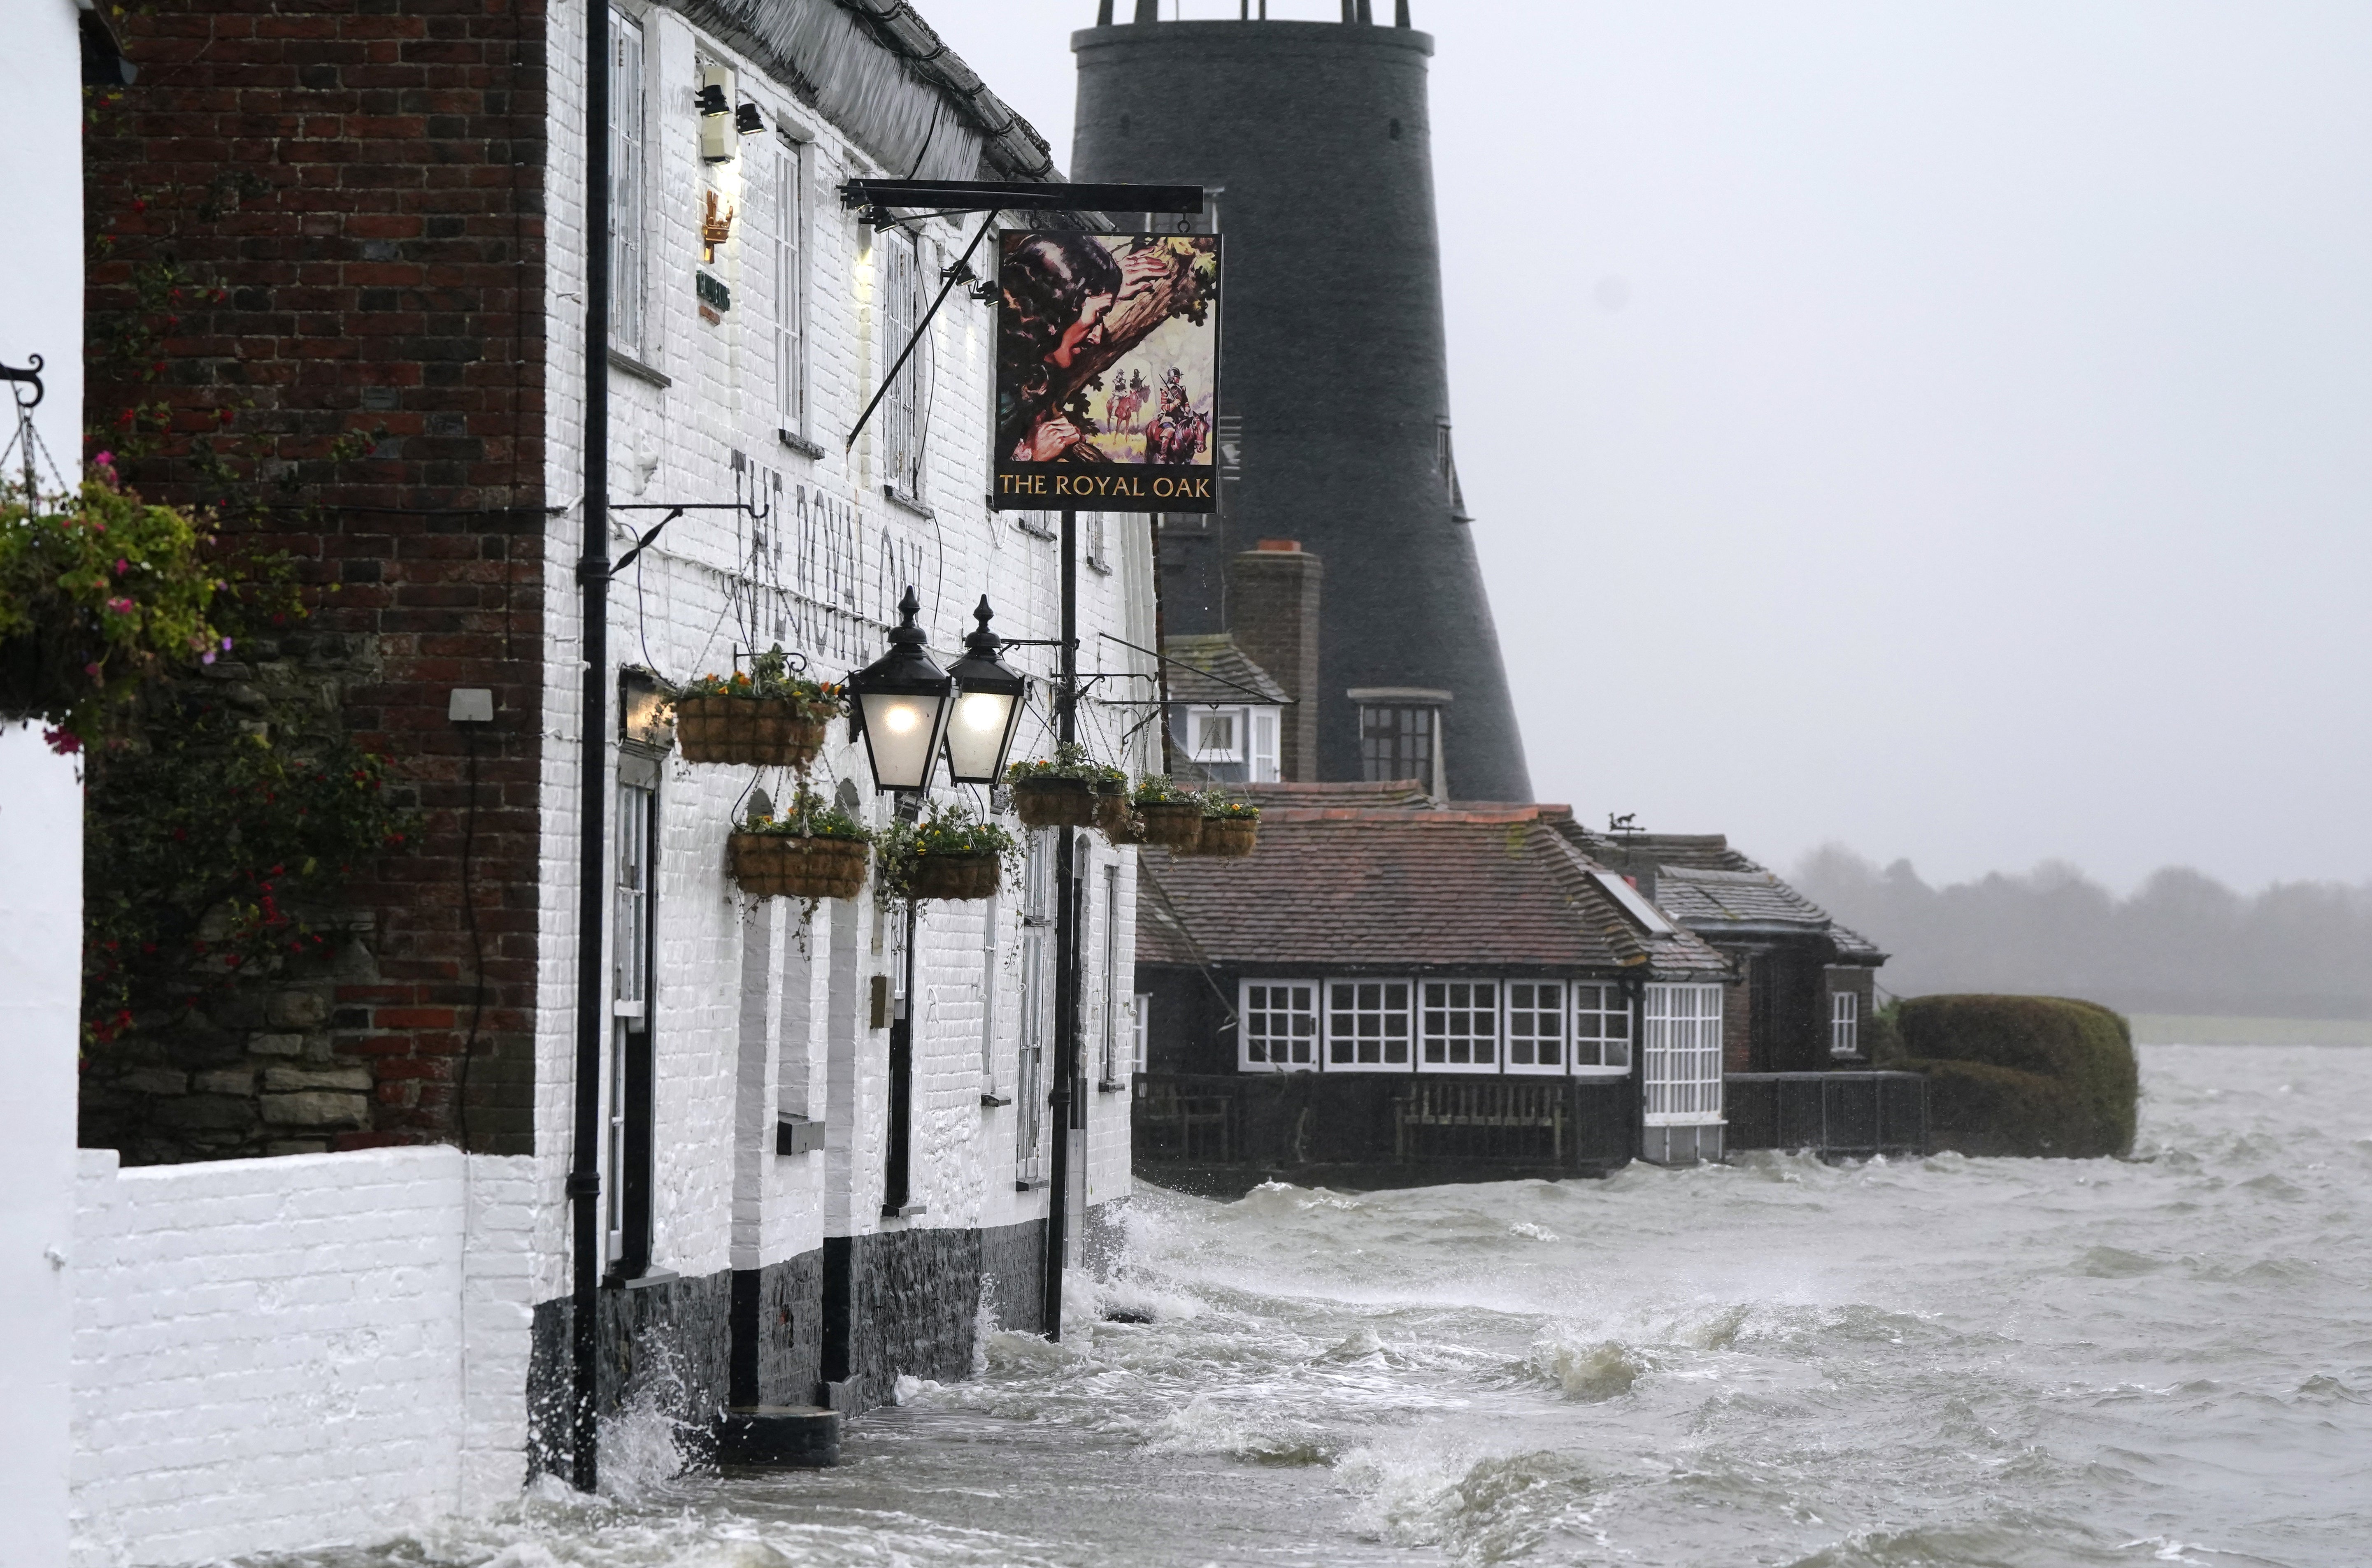 Sea water floods the shoreline outside the Royal Oak pub after high tide in Langstone, Hampshire (Andrew Matthews/PA)